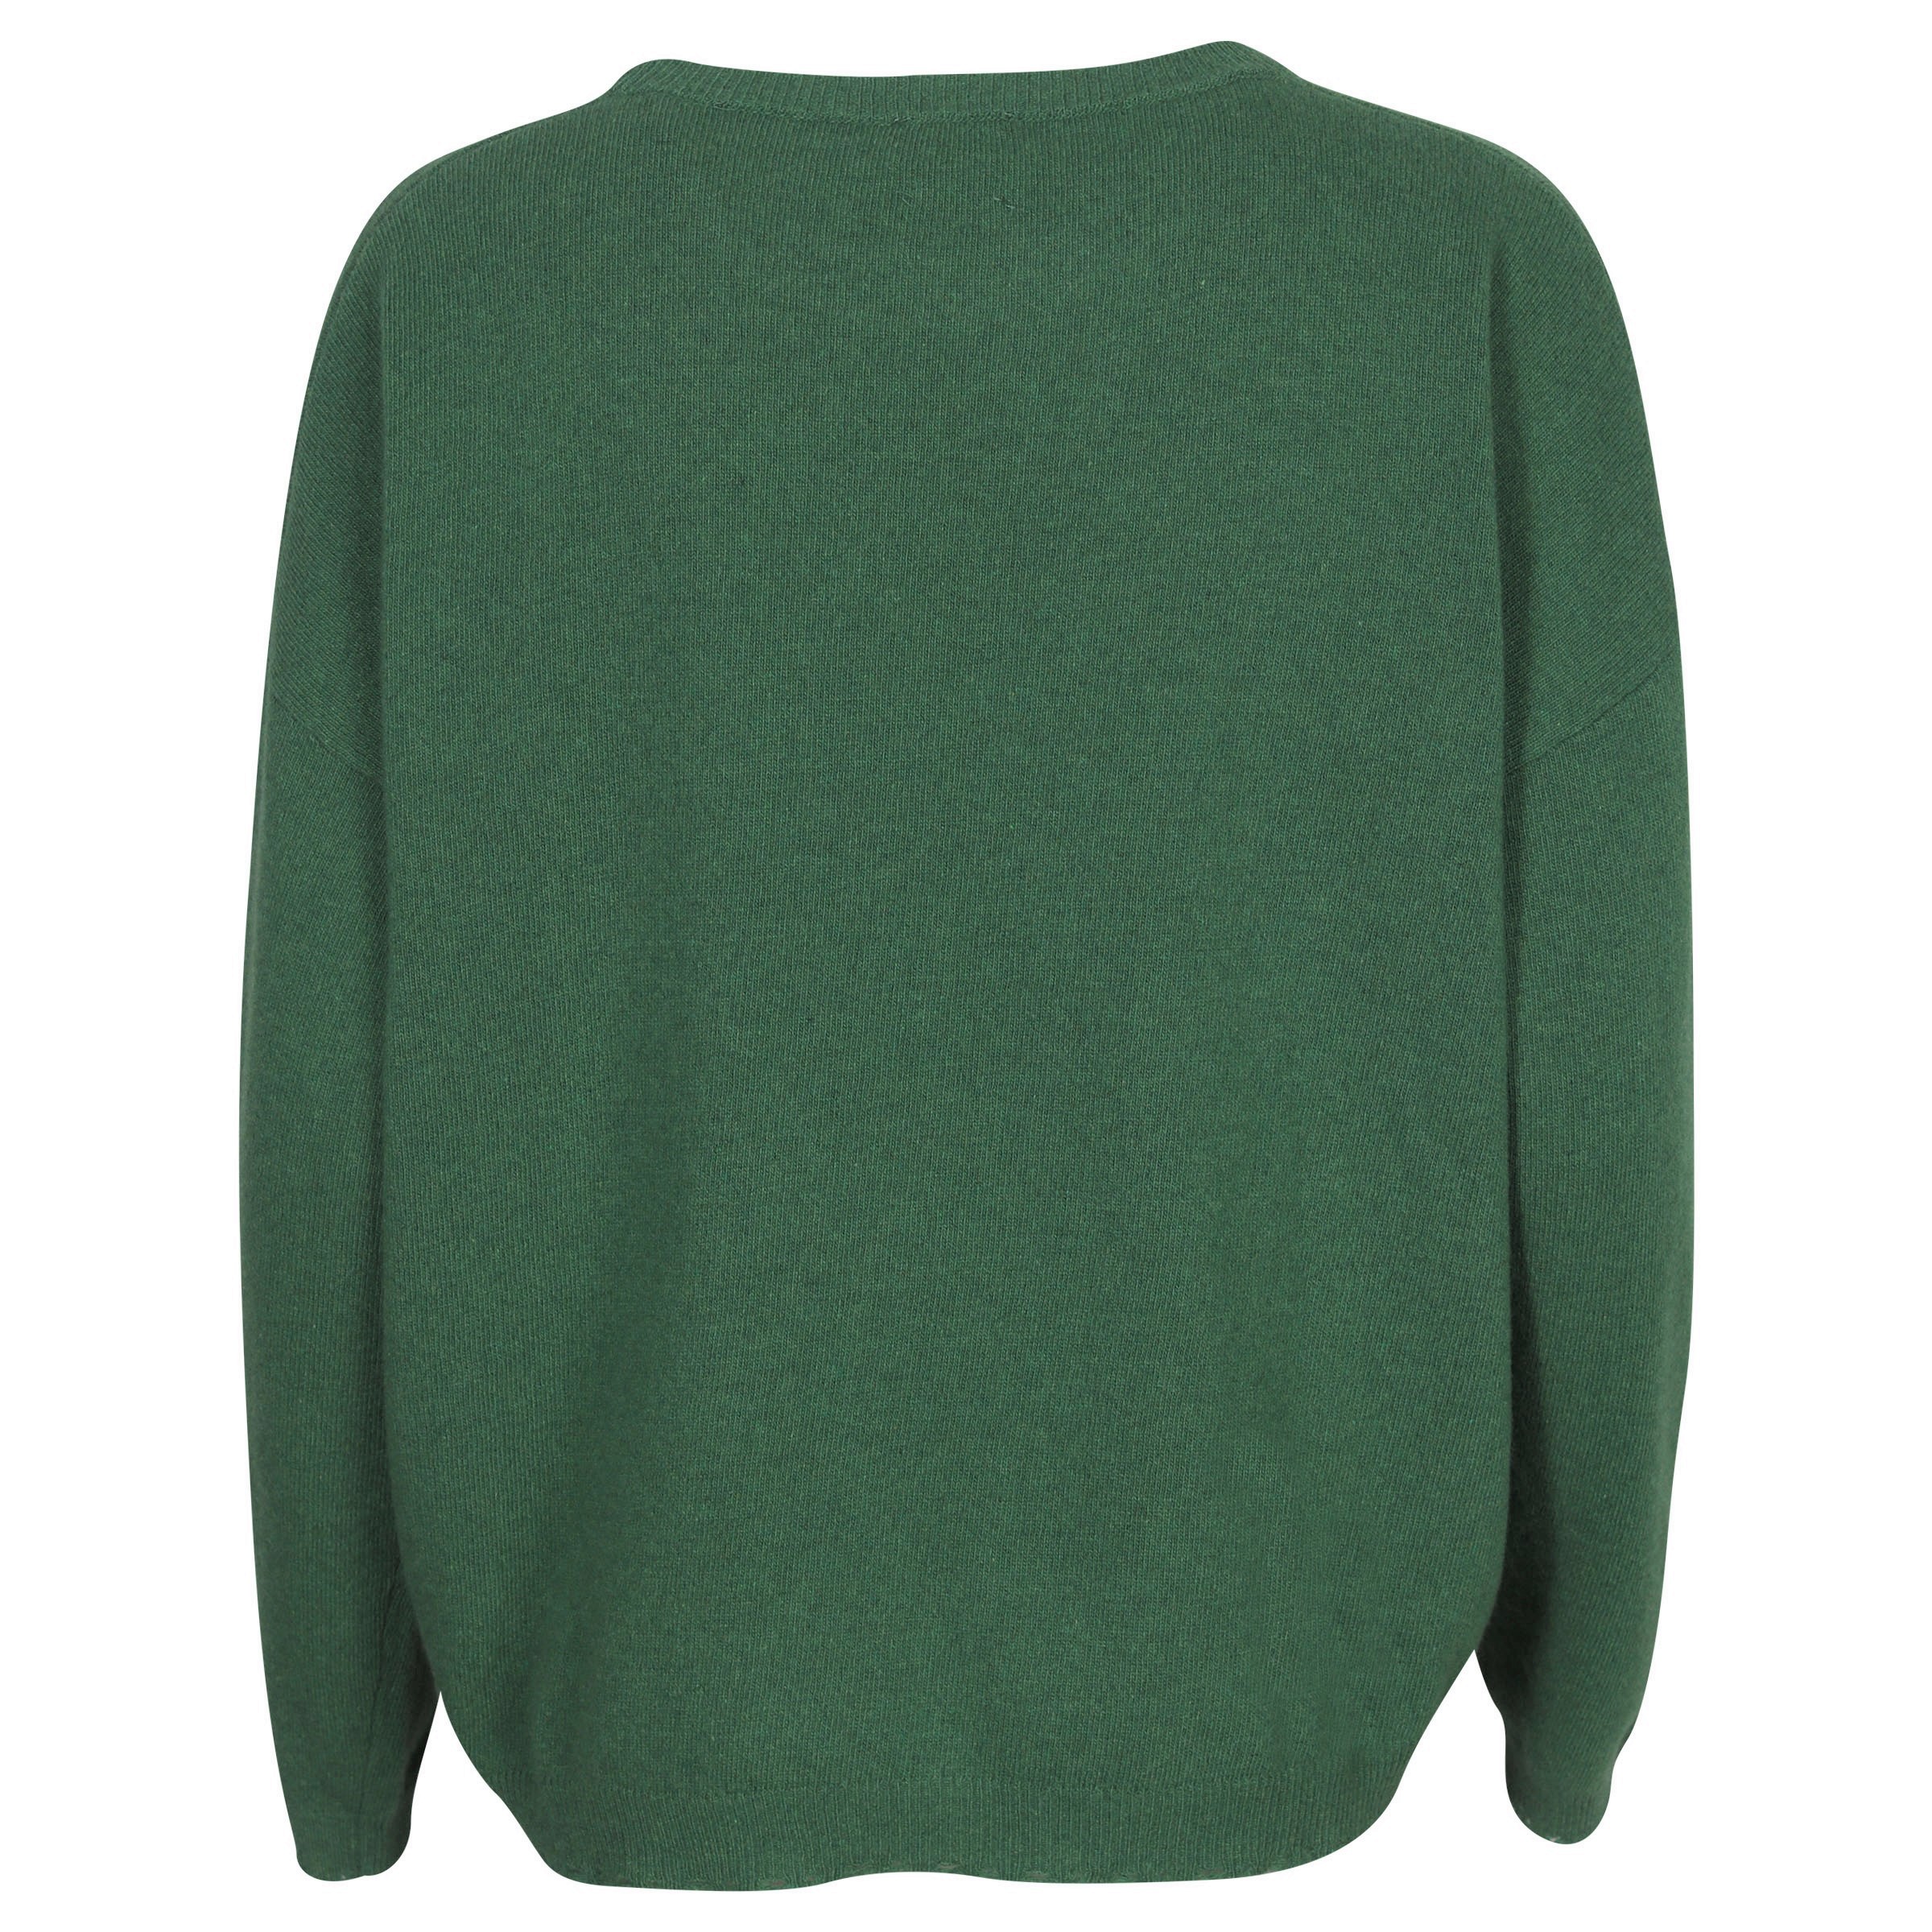 Phiili Recycled Cashmere Sweater in Green XS/S